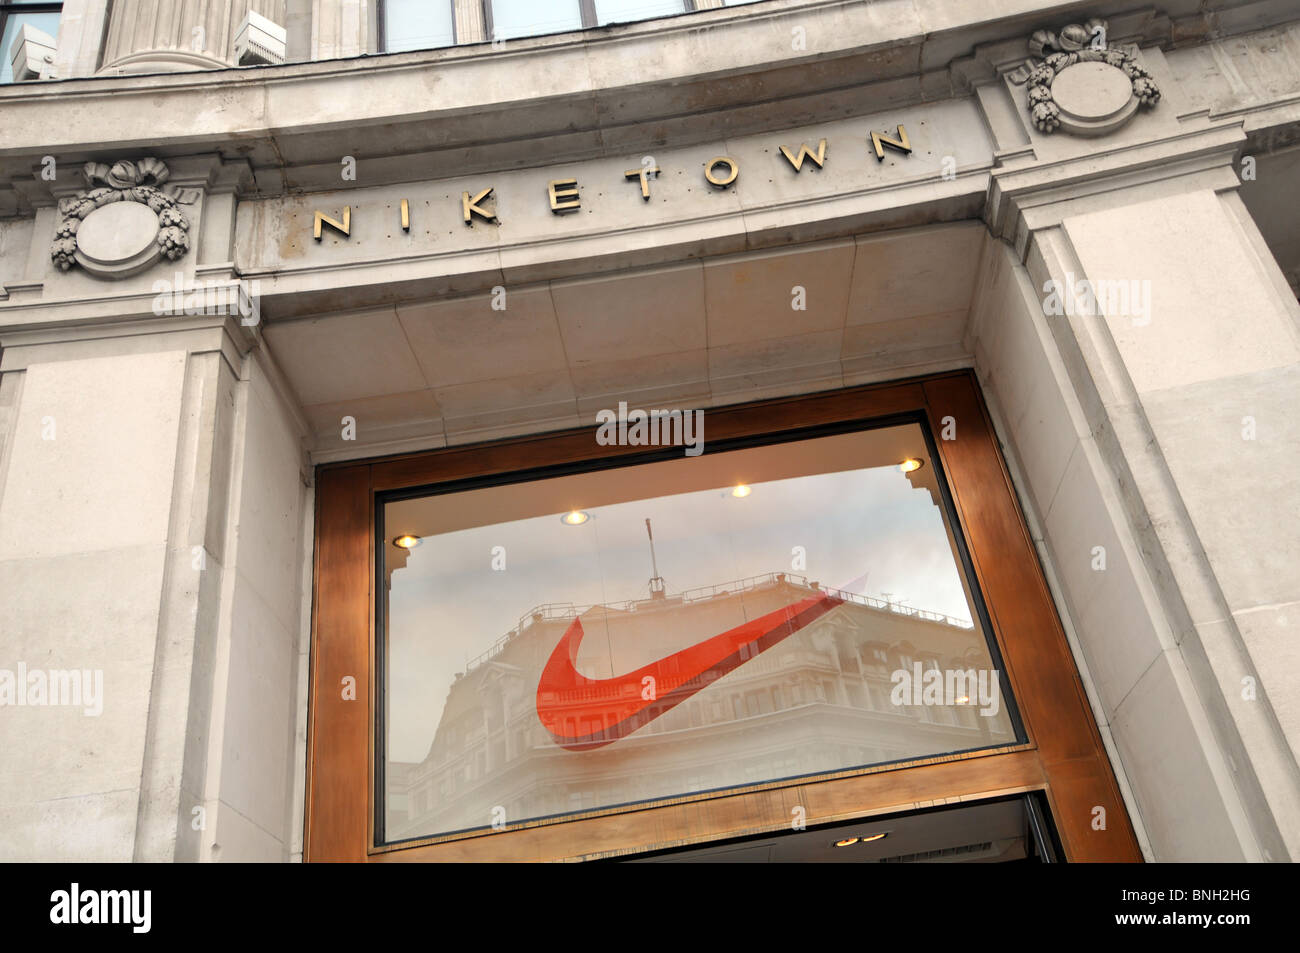 Niketown, Oxford Street, Londres, Angleterre Banque D'Images